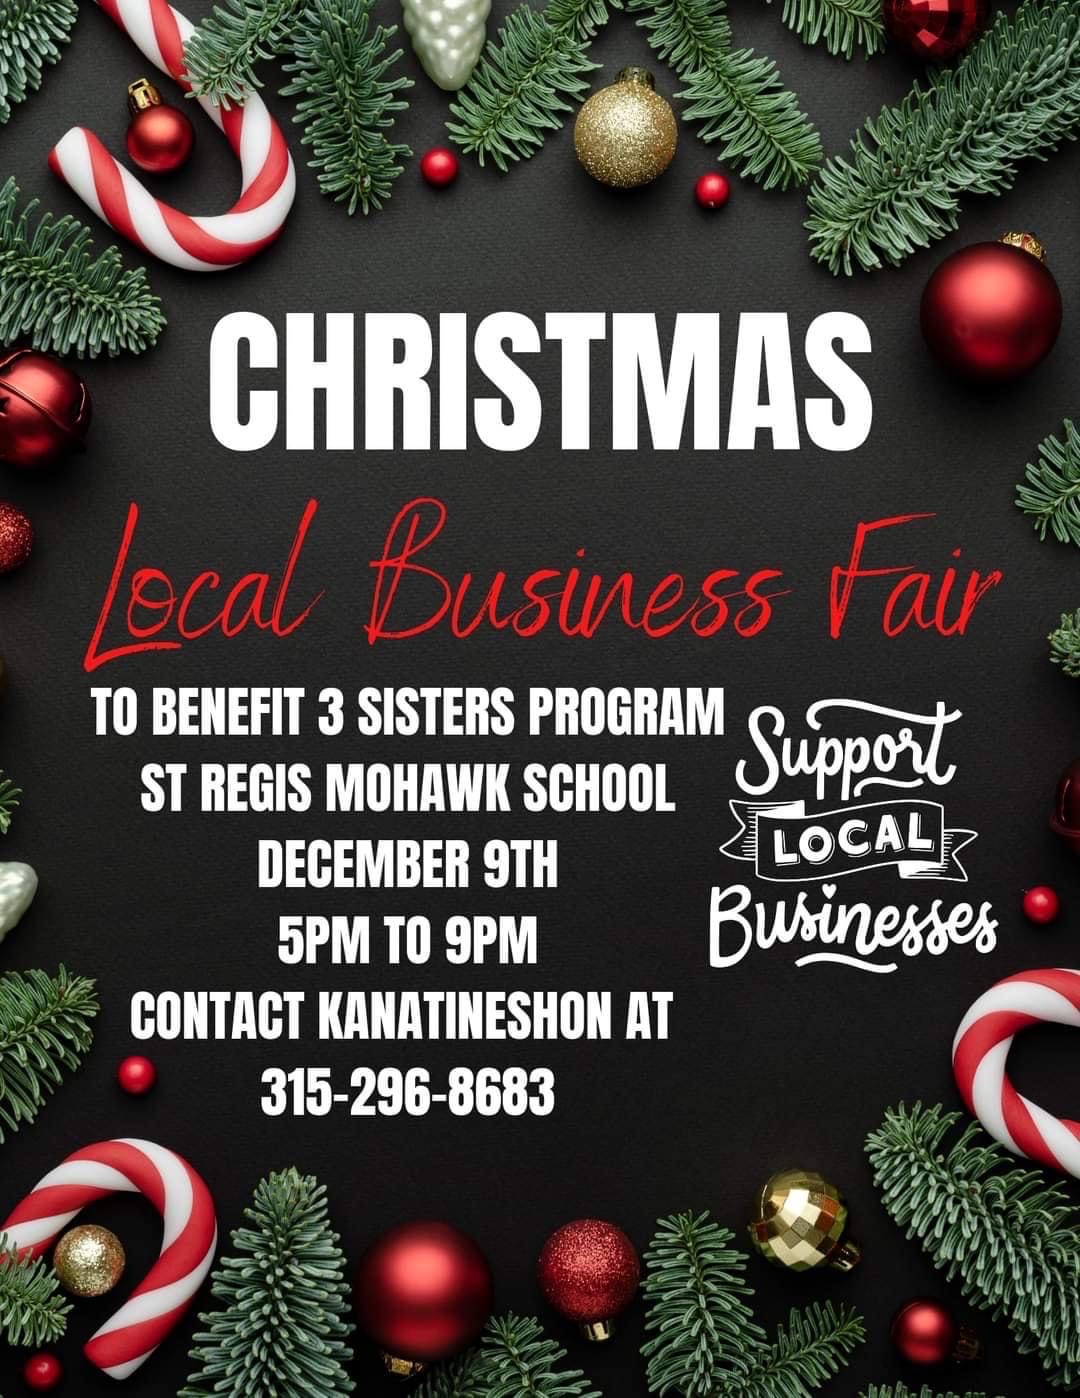 Shop local with our vendors from around the area! There will be crafts, items and products of all kinds available for everyone on your Christmas shopping list.

Participate in the silent auction that will have items from each vendor up for raffle. All proceeds of the auction will be donated to help assist the Three Sisters Program.